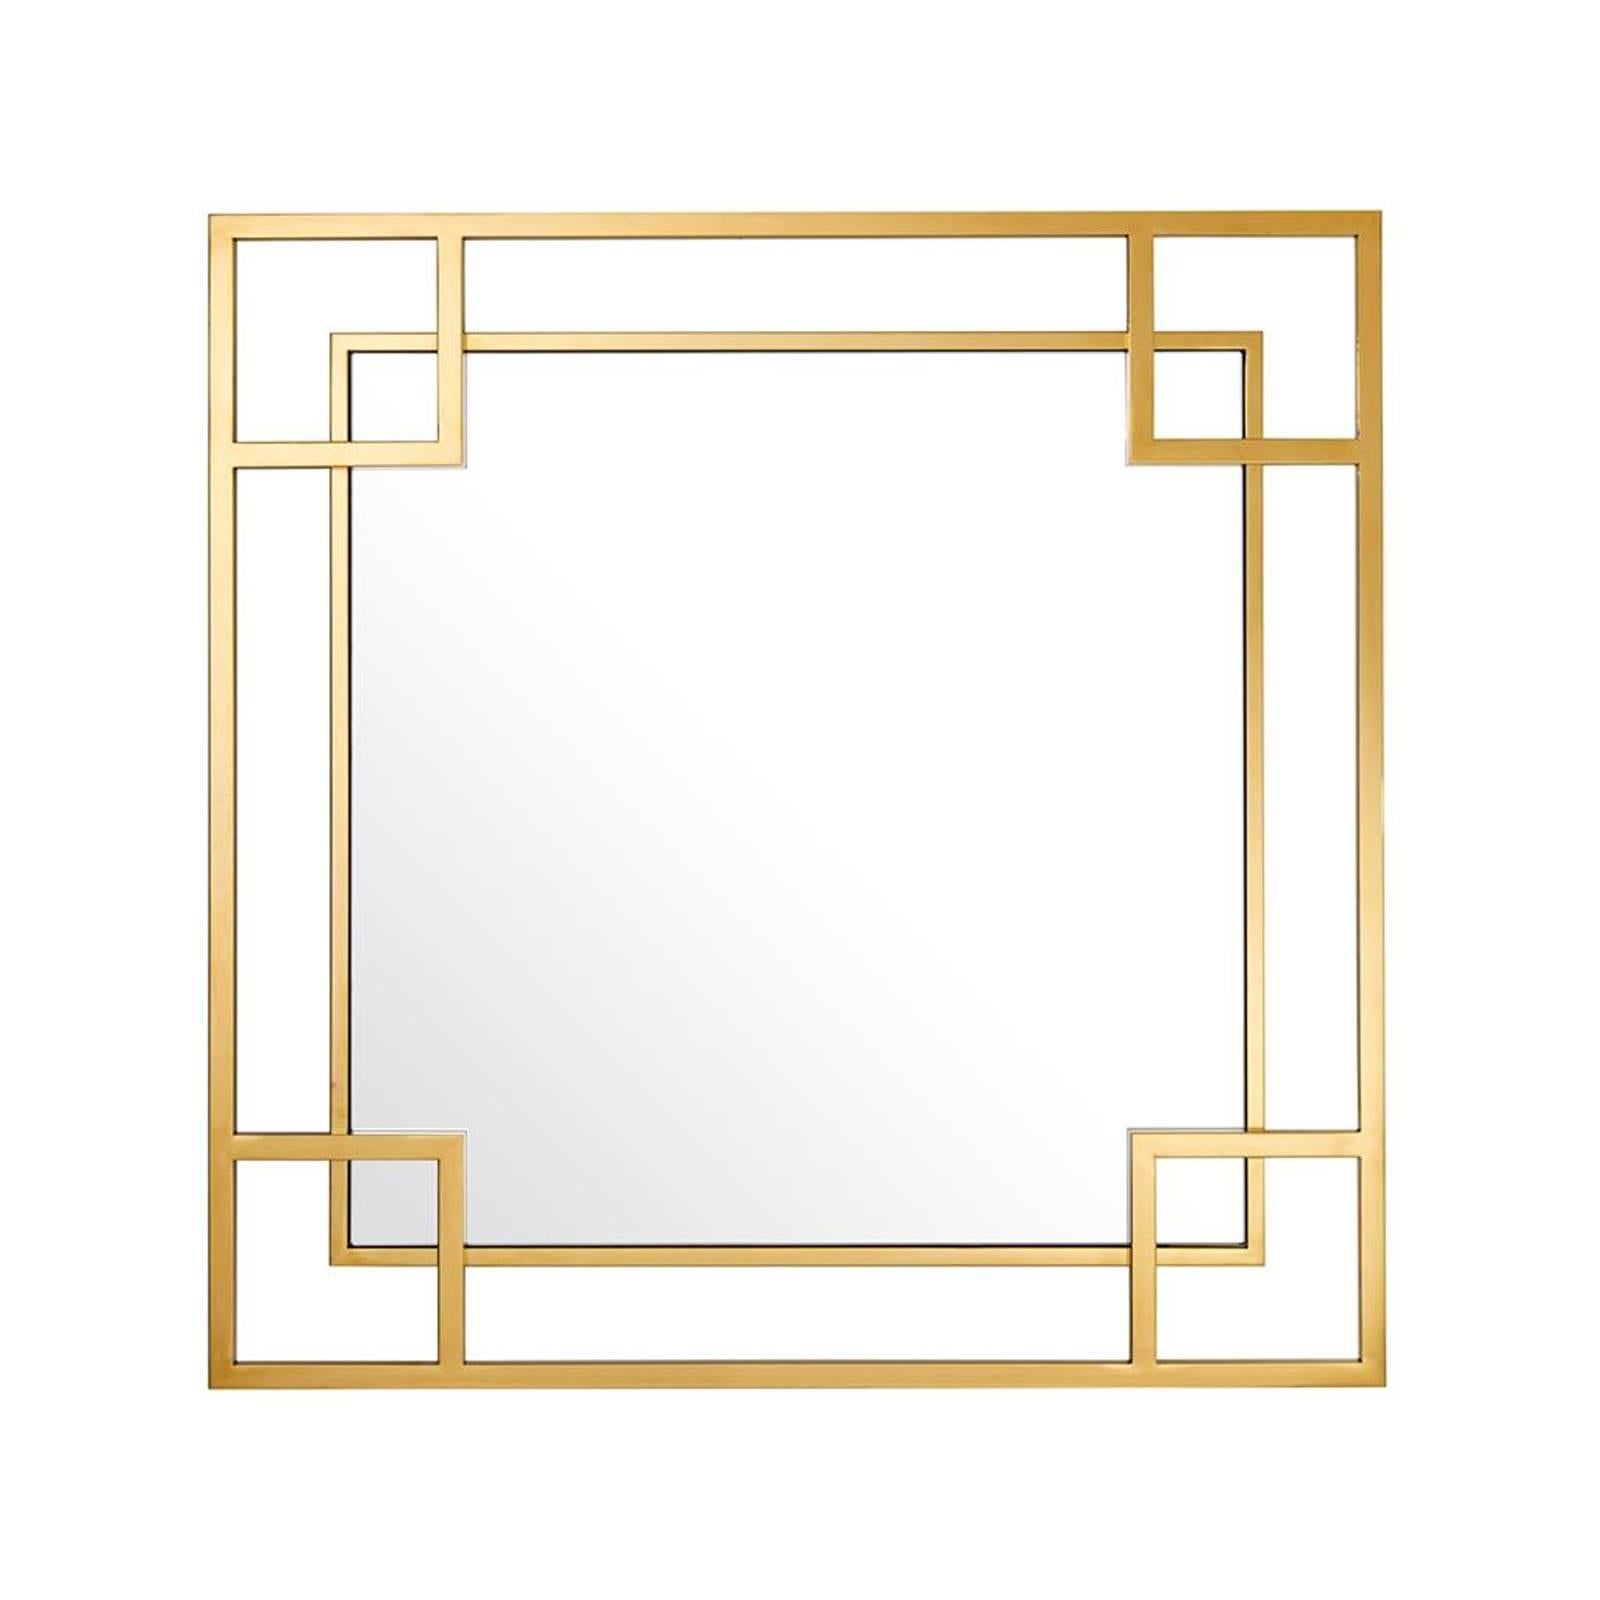 Slim Square Mirror in Polished Stainless Steel or Gold Finish 1